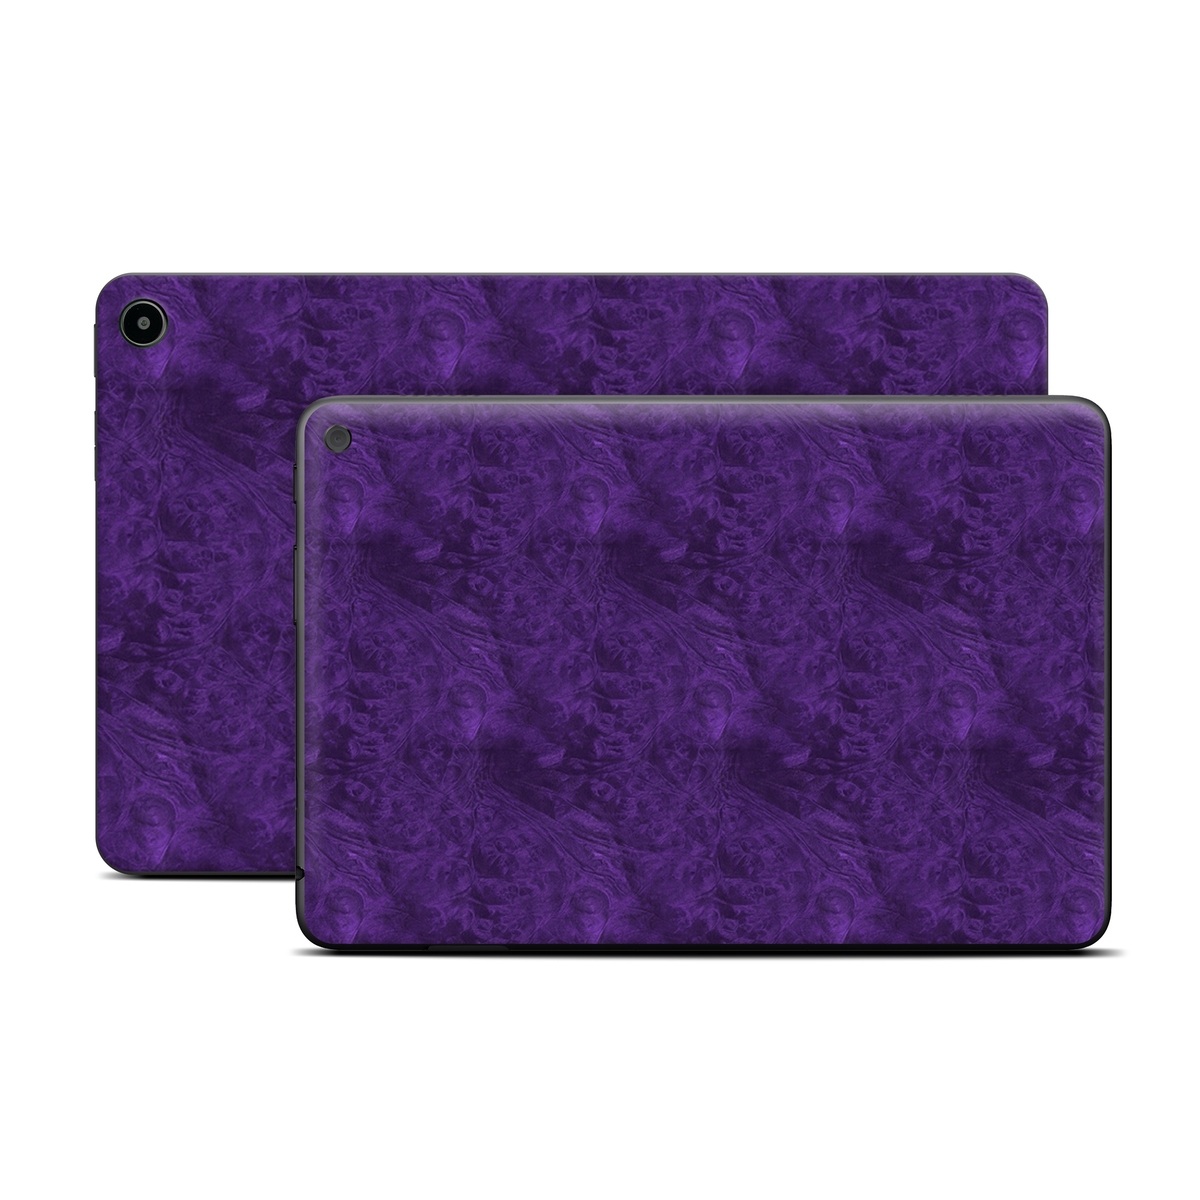 Amazon Fire Tablet Series Skin Skin design of Violet, Purple, Lilac, Pattern, Magenta, Textile, Wallpaper, with black, blue colors